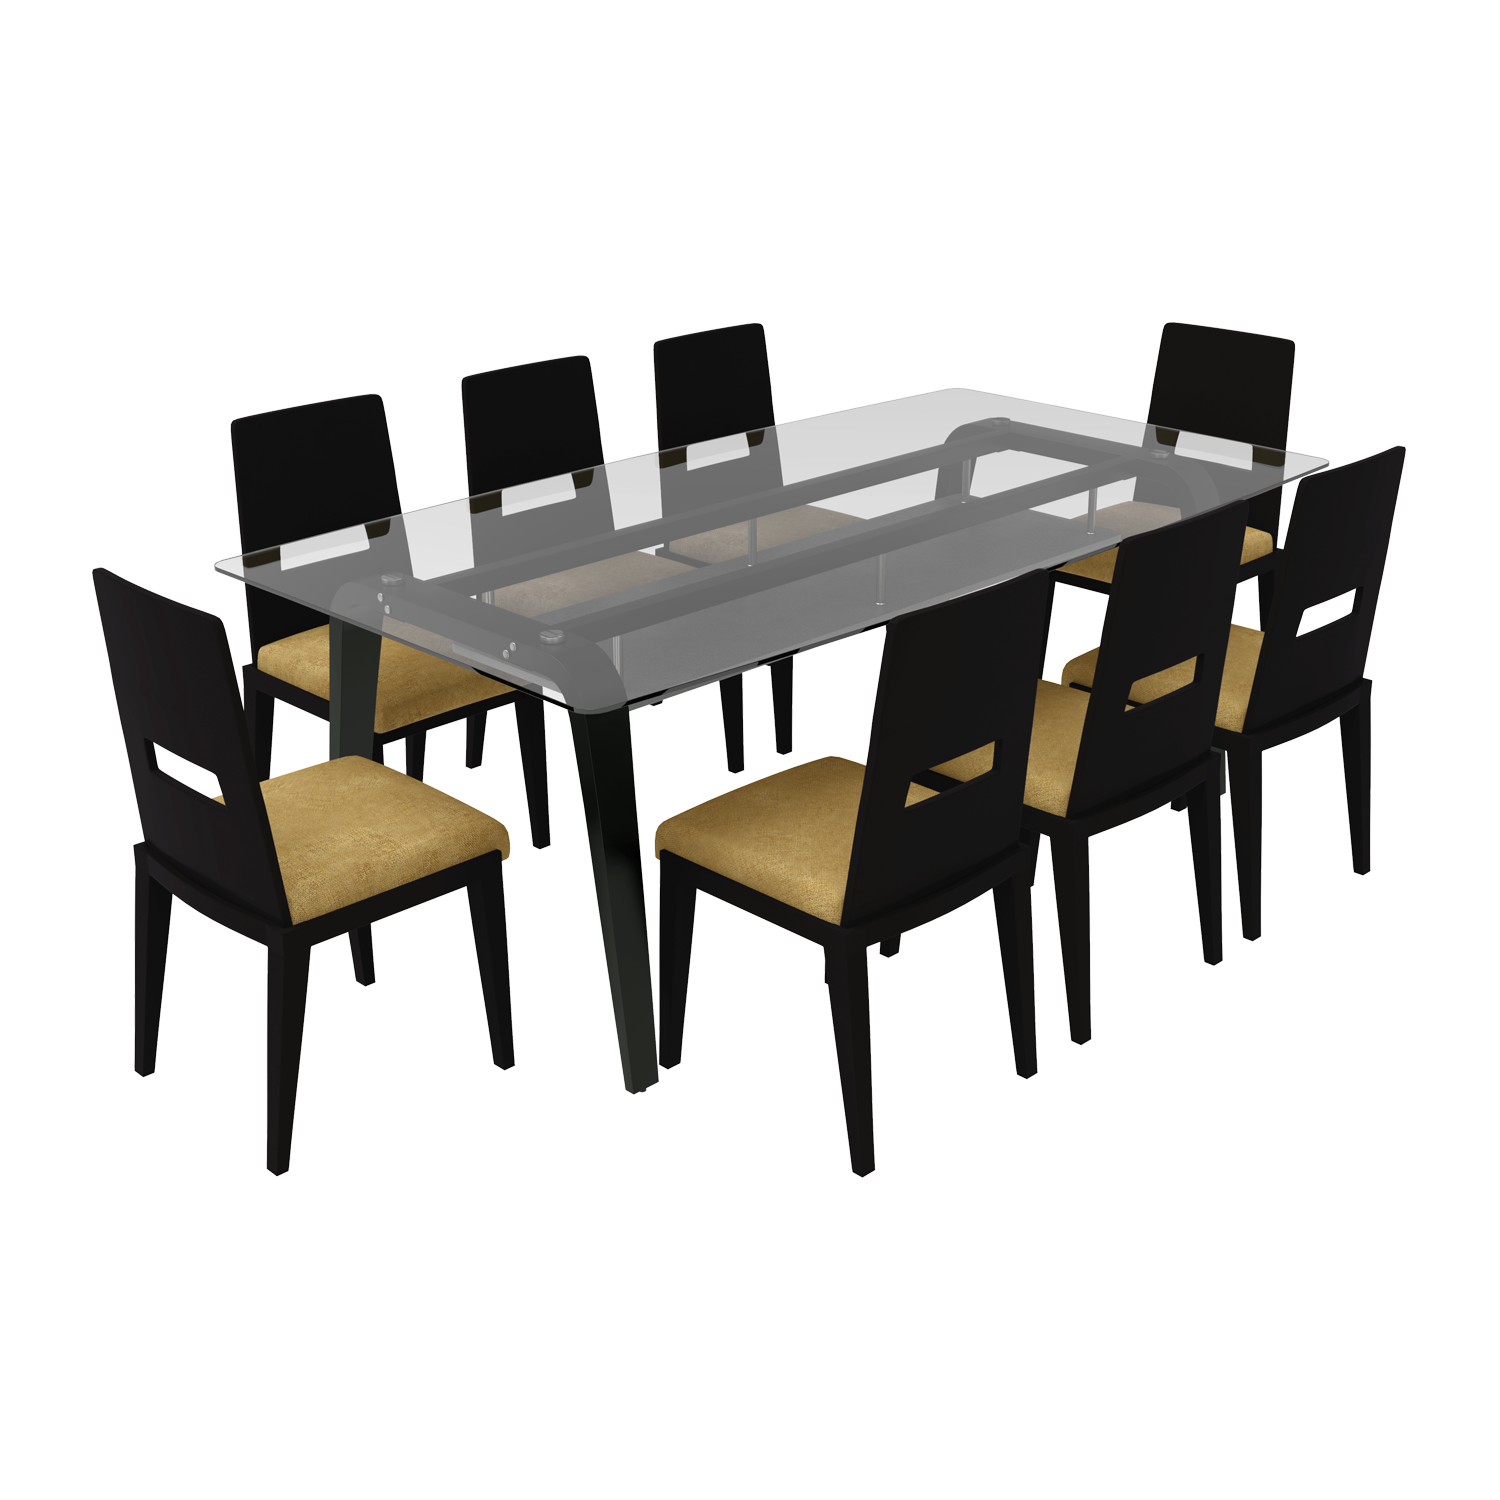 Crescent 8 Seater Dining Table Set, How Big Is A 8 Seater Table